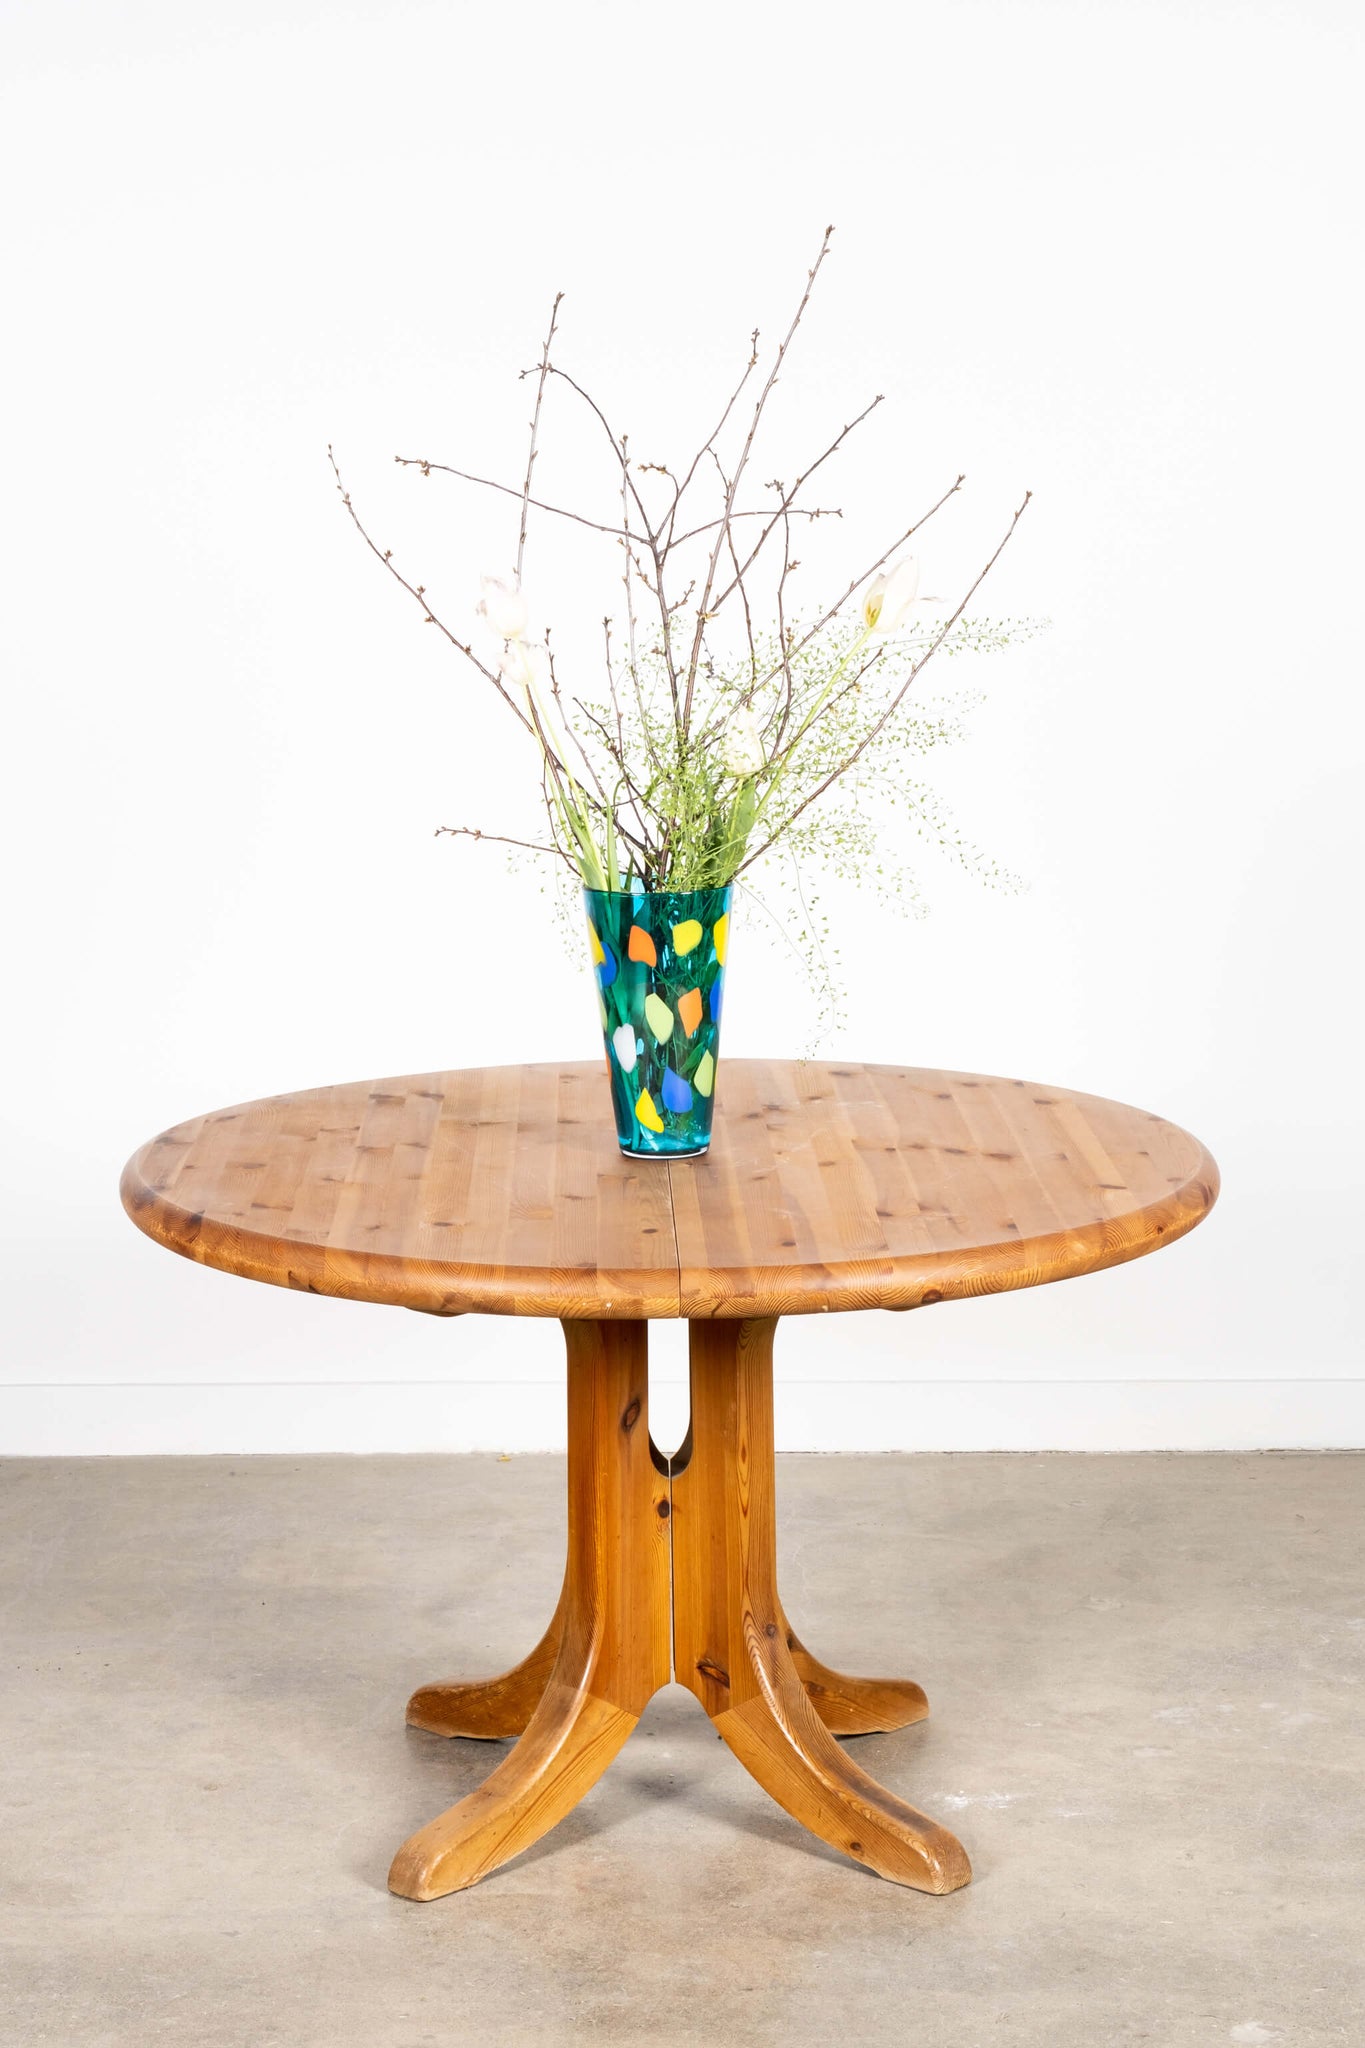 Vintage 1970s Solid Pine Extendable Dining Table, shown without leaves and a vase